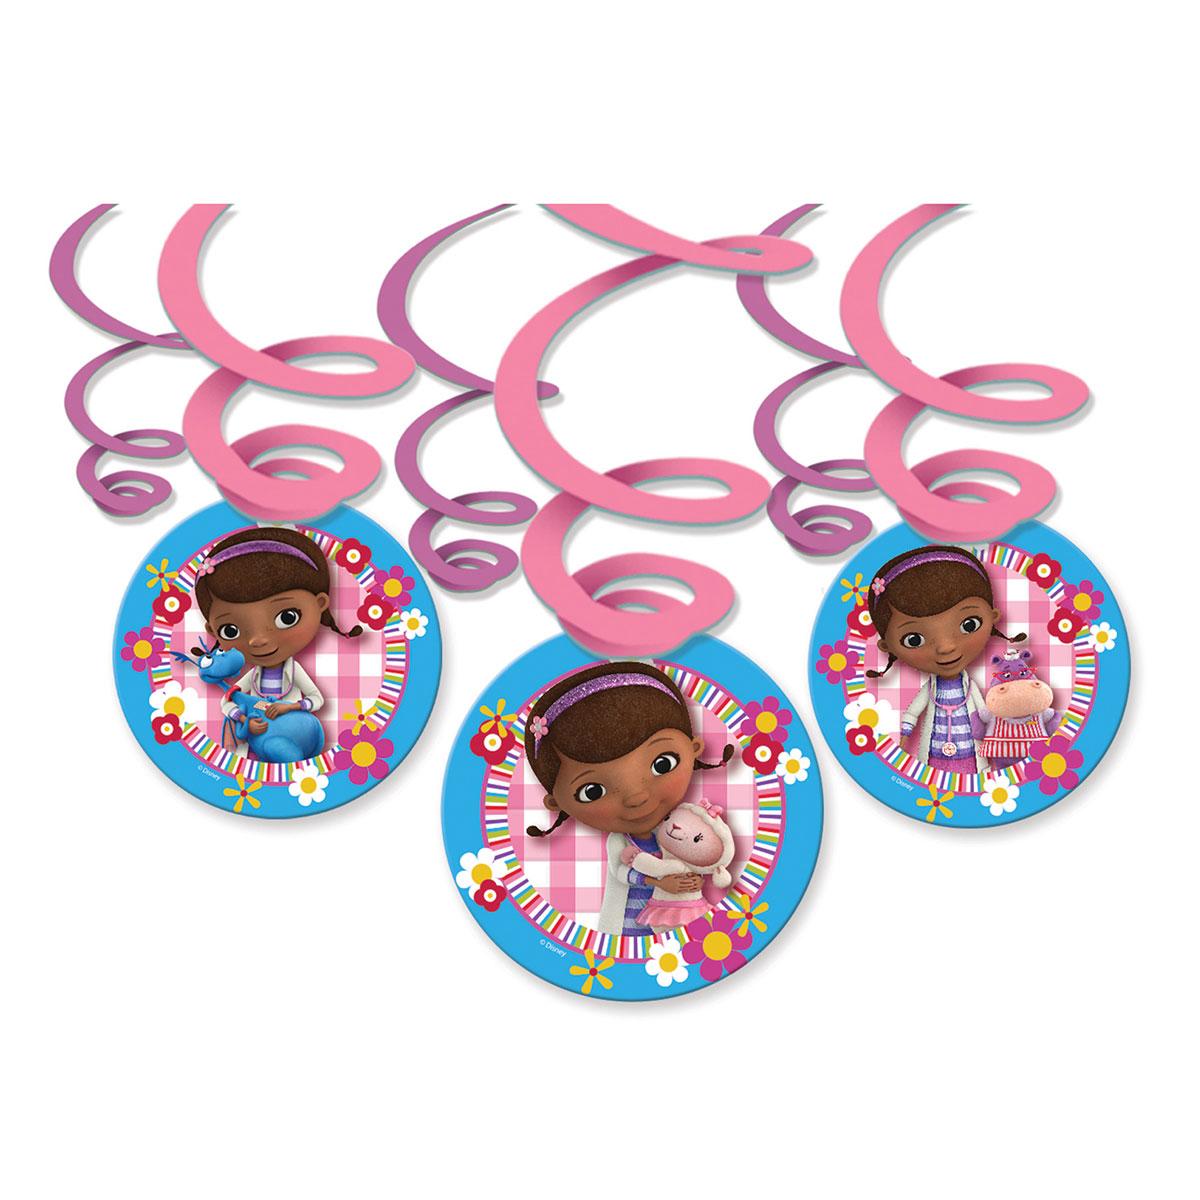 Doc McStuffiins Swirl Decorations Pk6 fully licensed by Disney Junior by Amscan 996904 and available here at Karnival Costumes online party shop